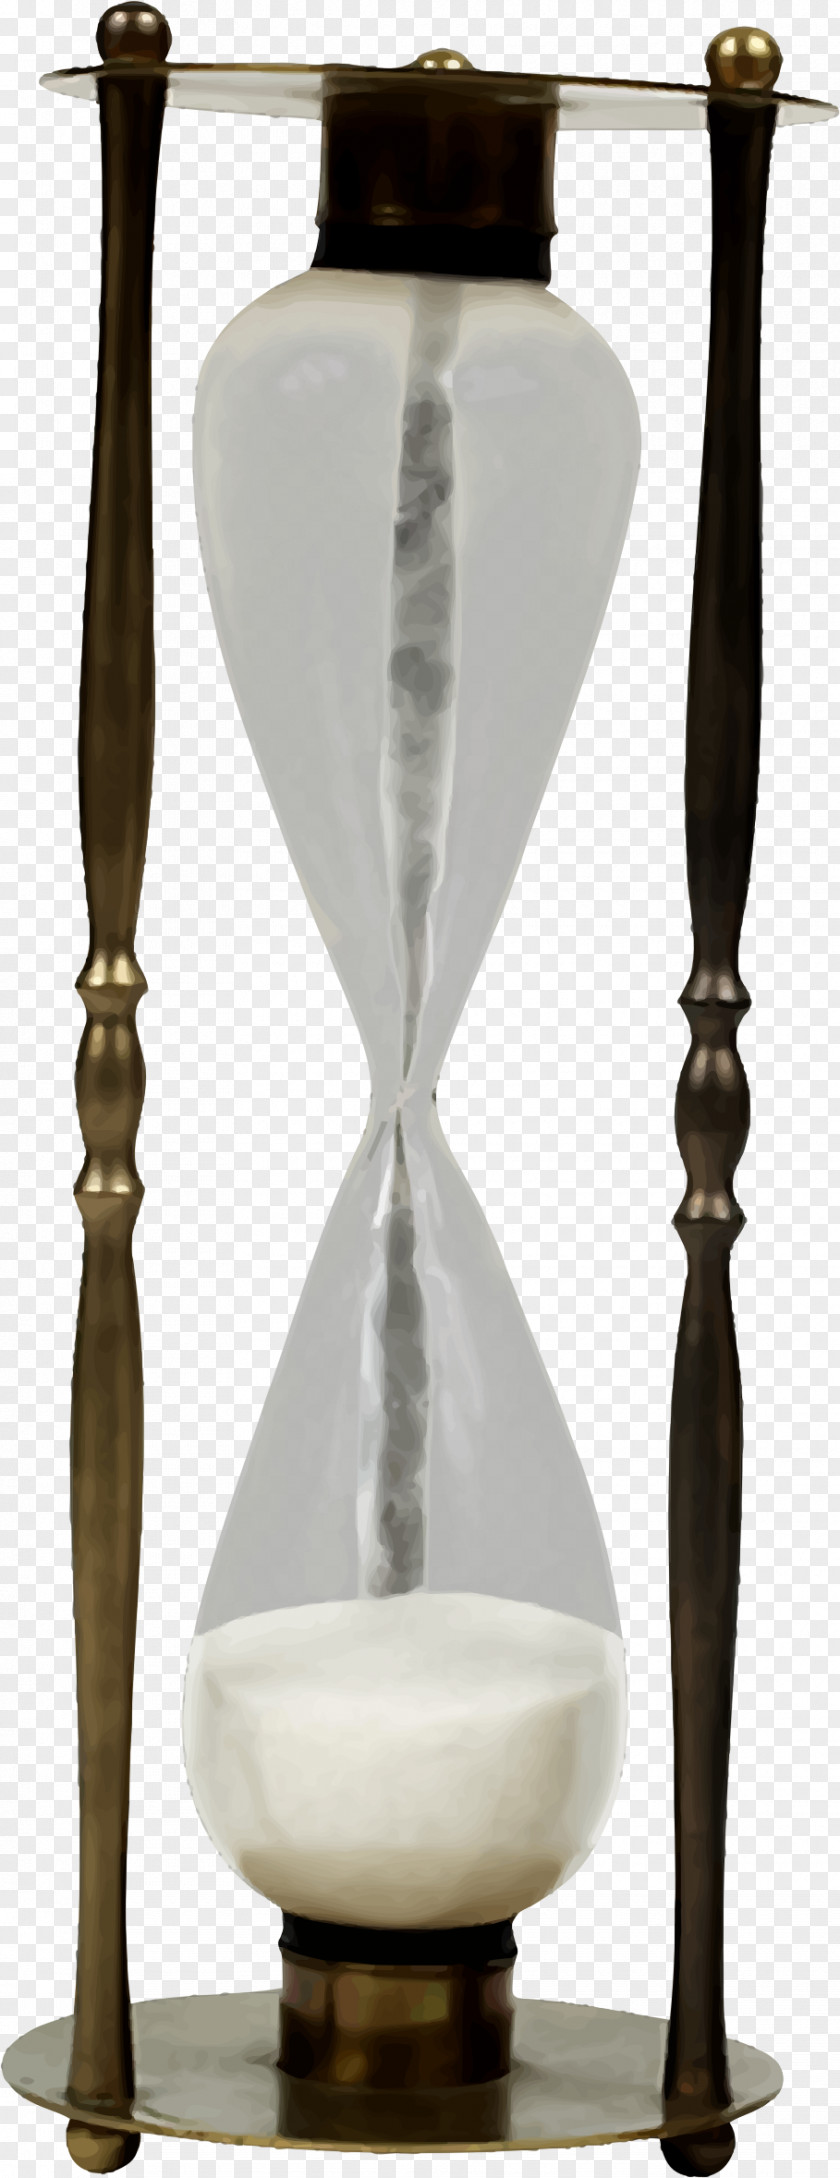 Hourglass Time England Clock PNG